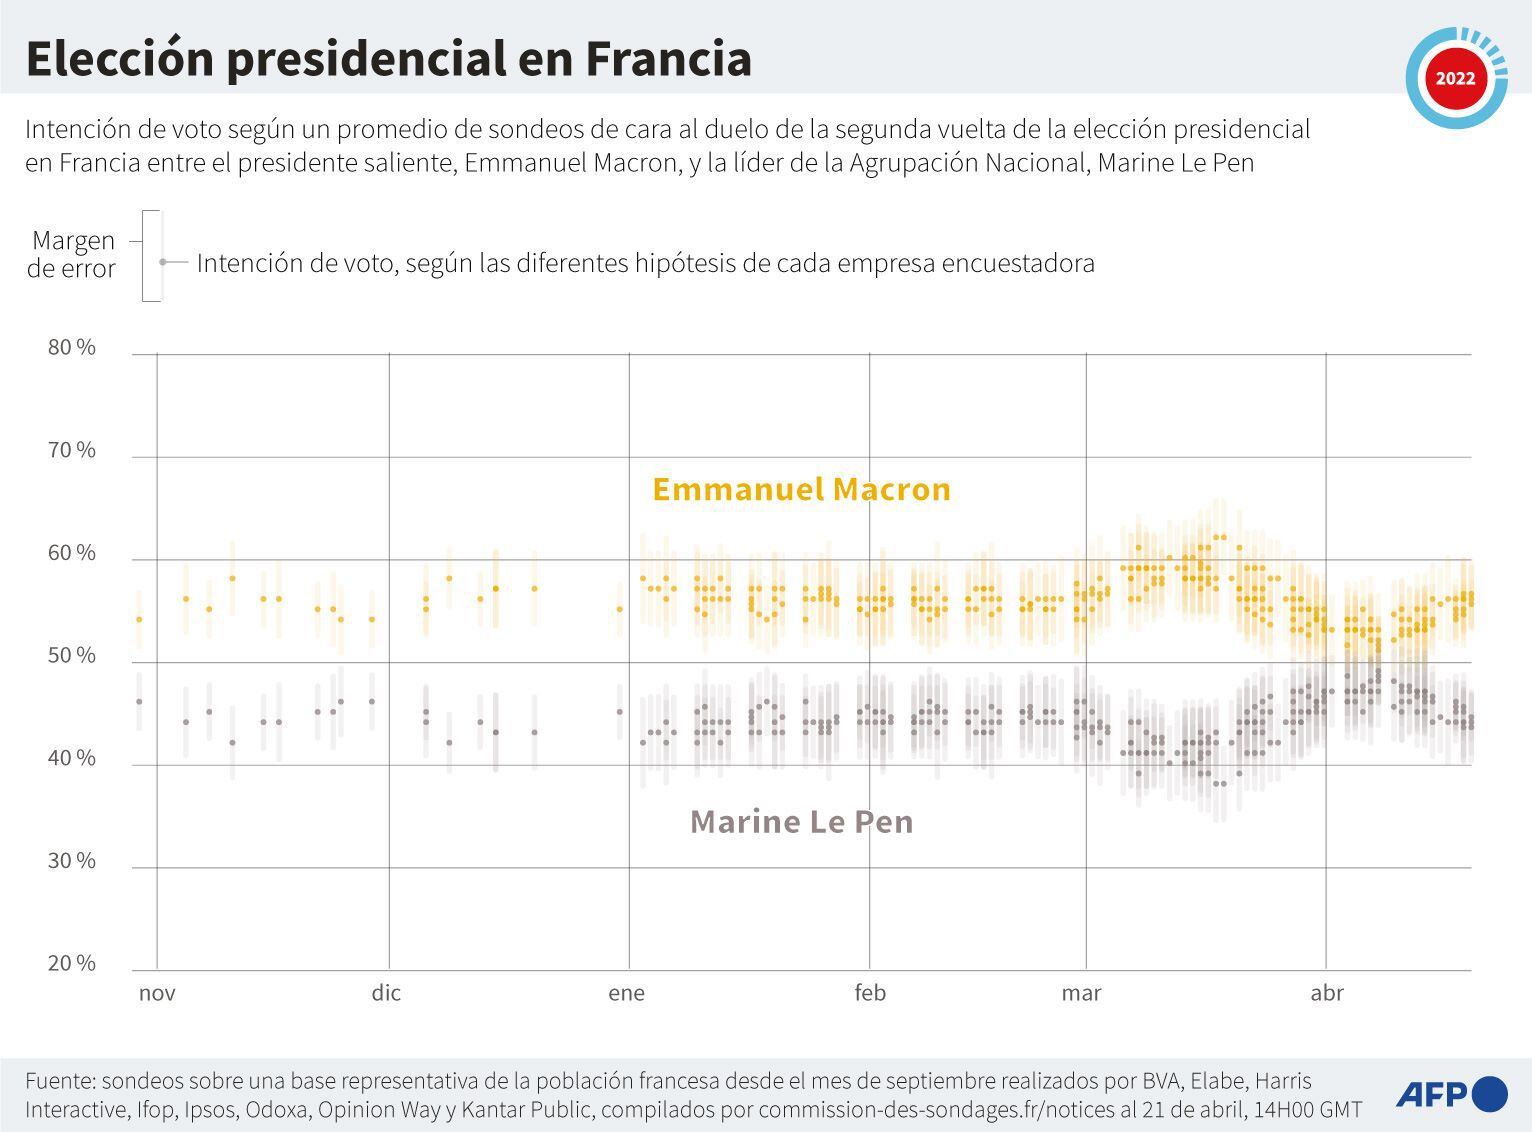 Voting intention in France.  (AFP).